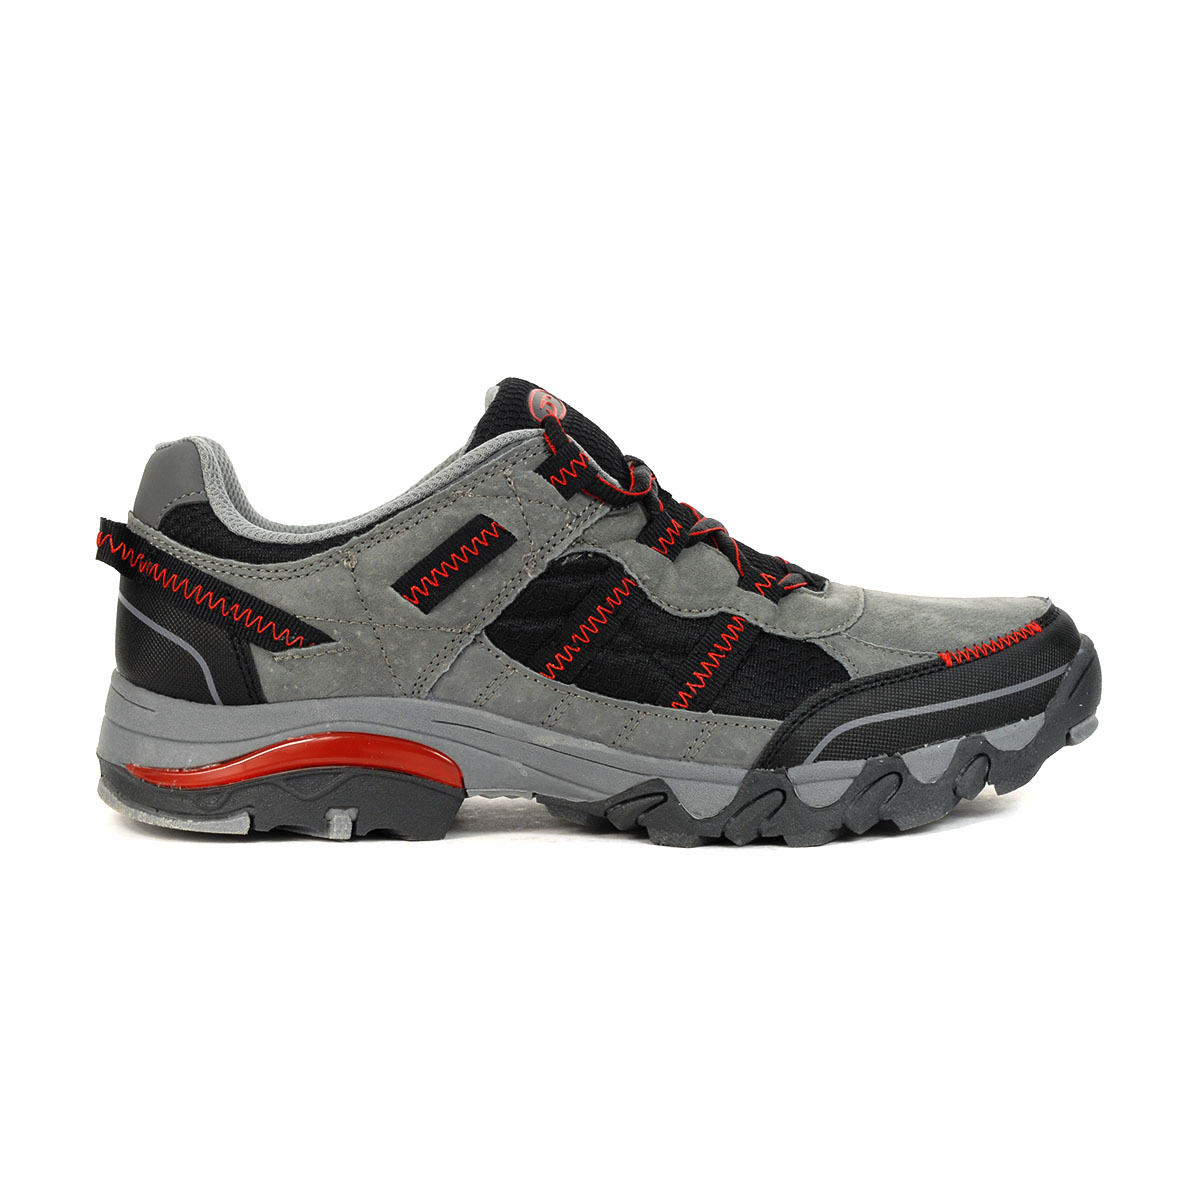 Dr. Scholl's Men's Canopy Black/Grey Suede Hiking Shoes - WOOKI.COM